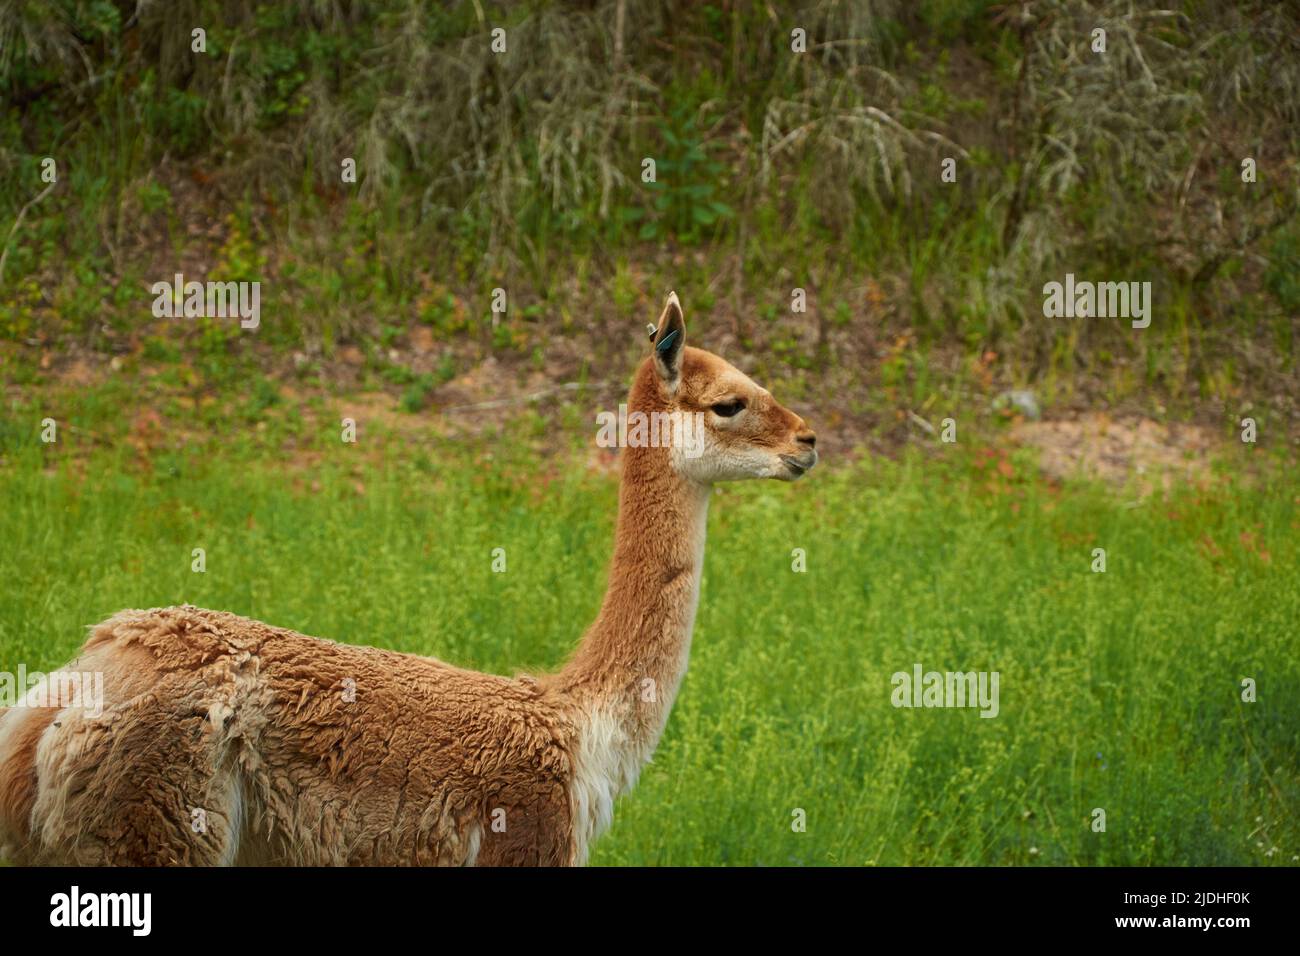 Lama vicugna is grazing in a pasture. Close-up portrait. A species of artiodactyl mammals of the camel family Stock Photo